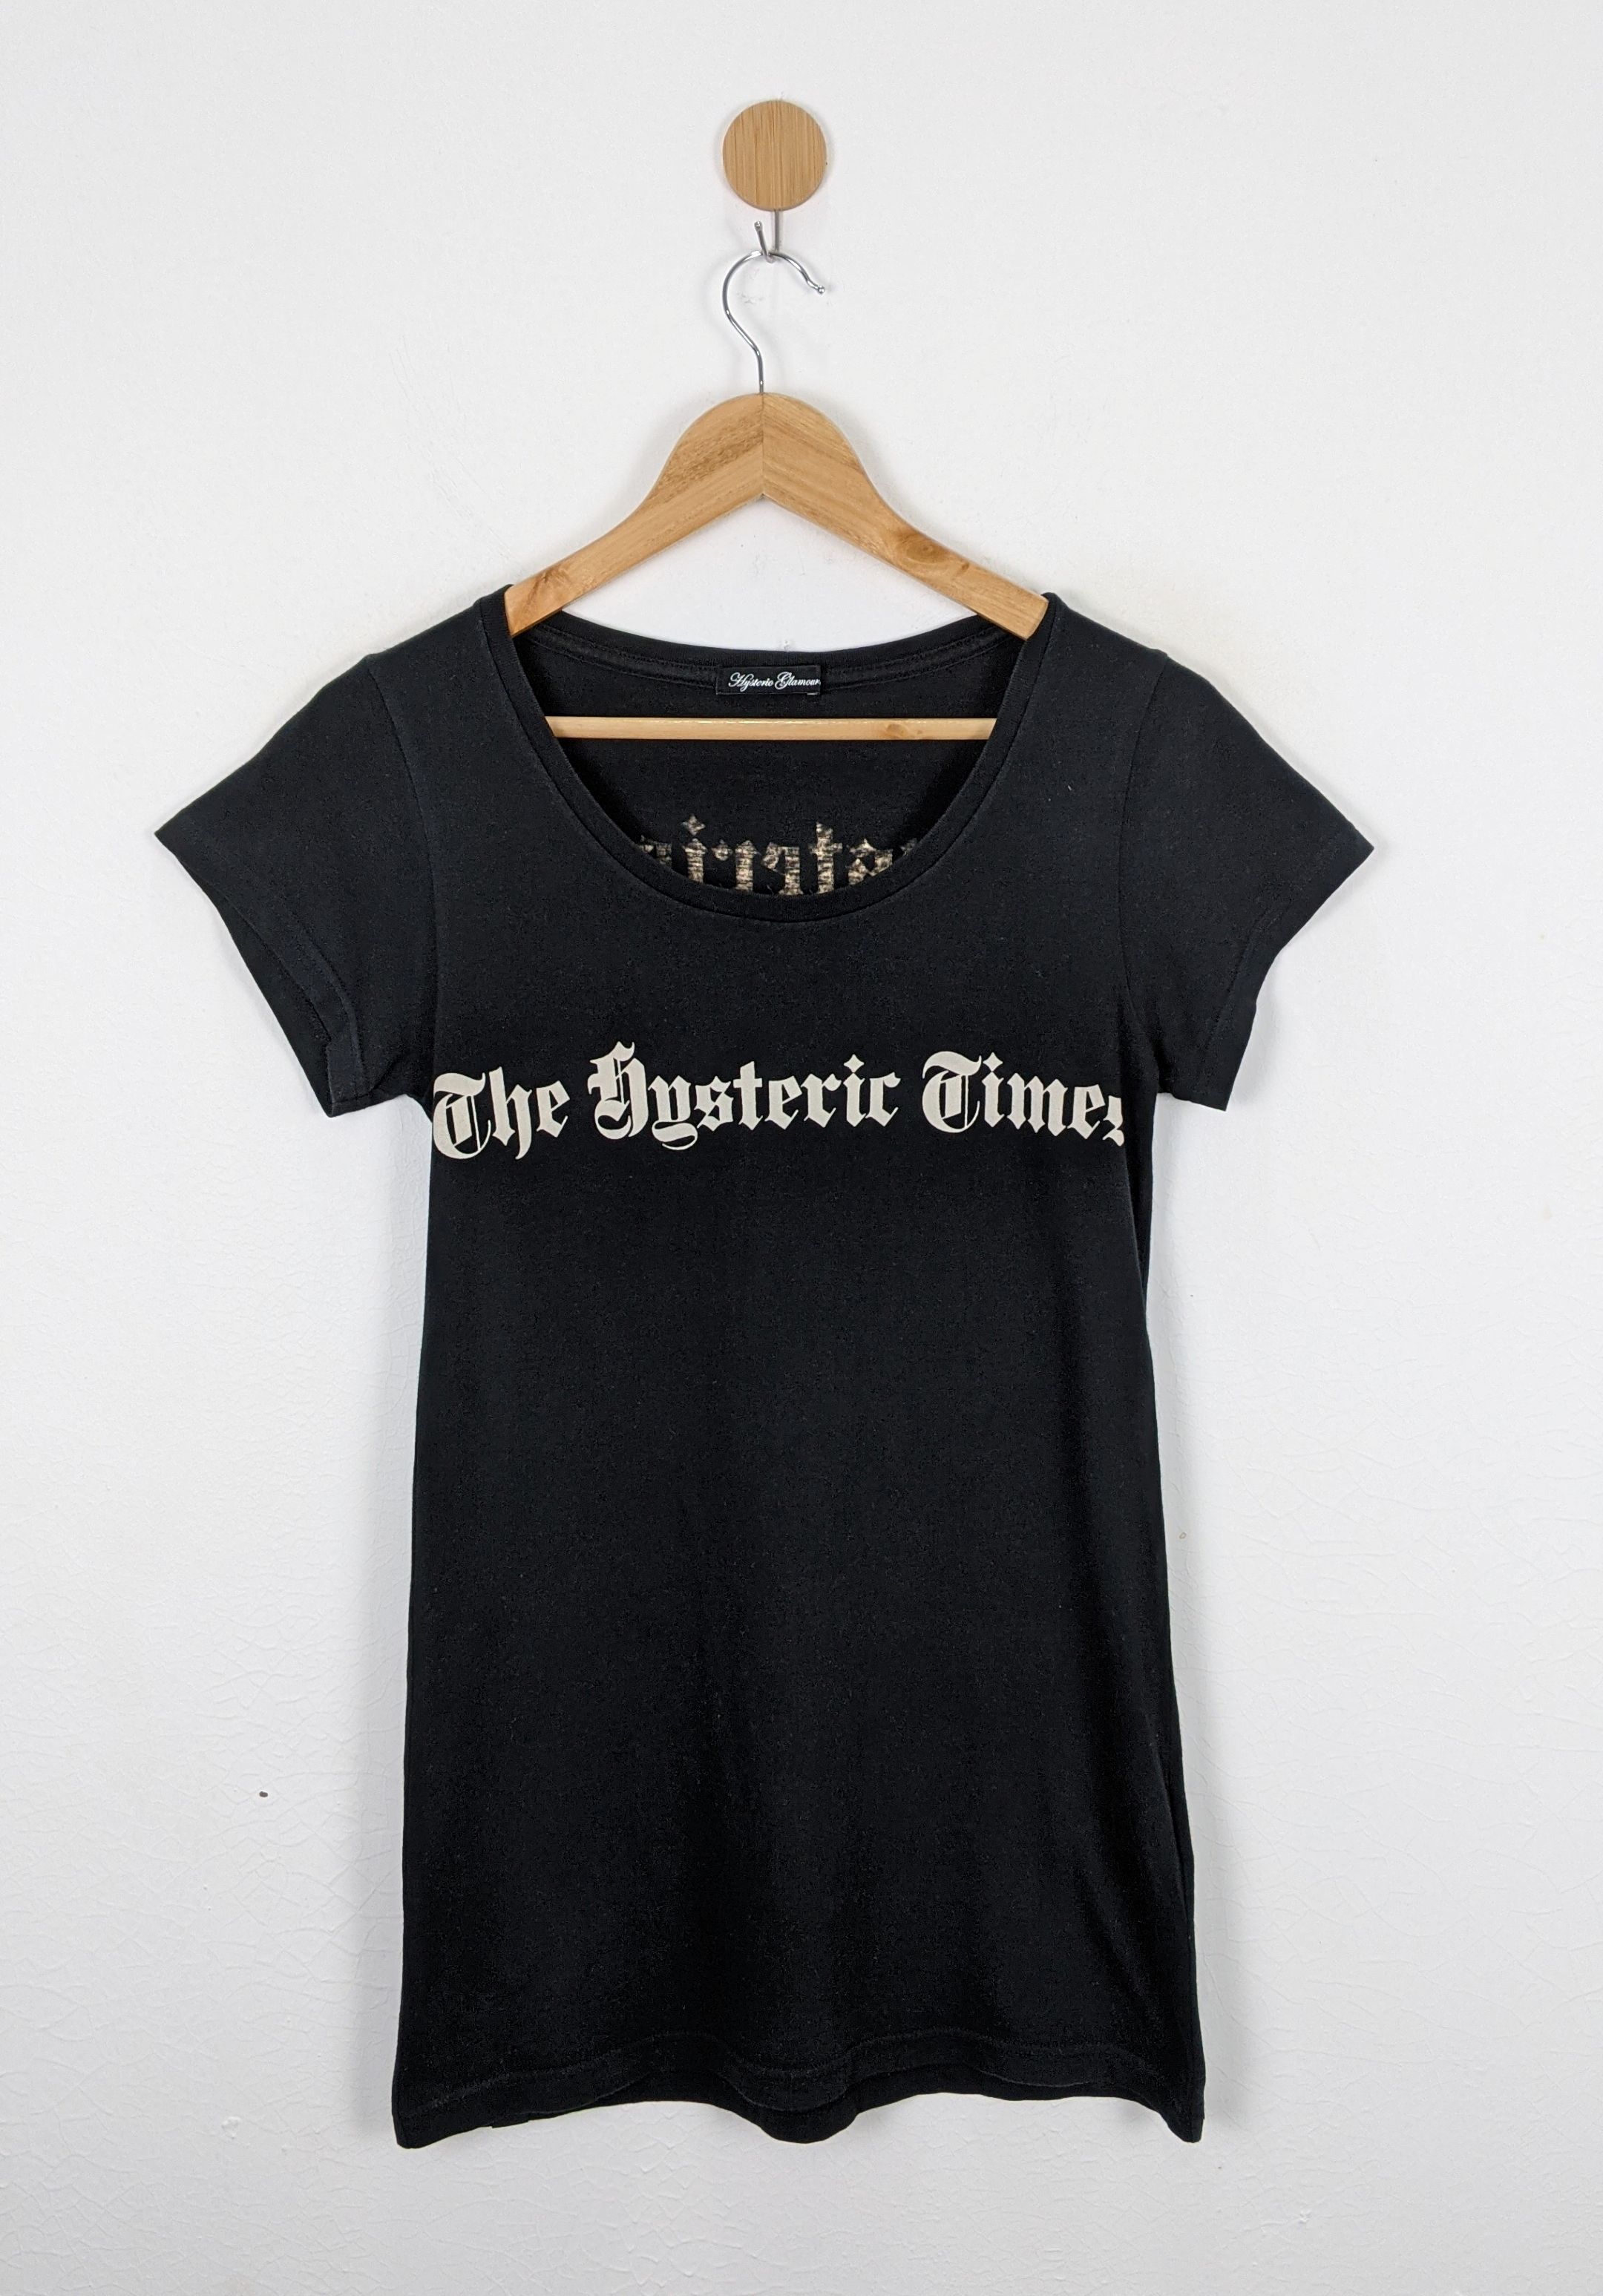 The Hysteric Times by Hysteric Glamour shirt - 2